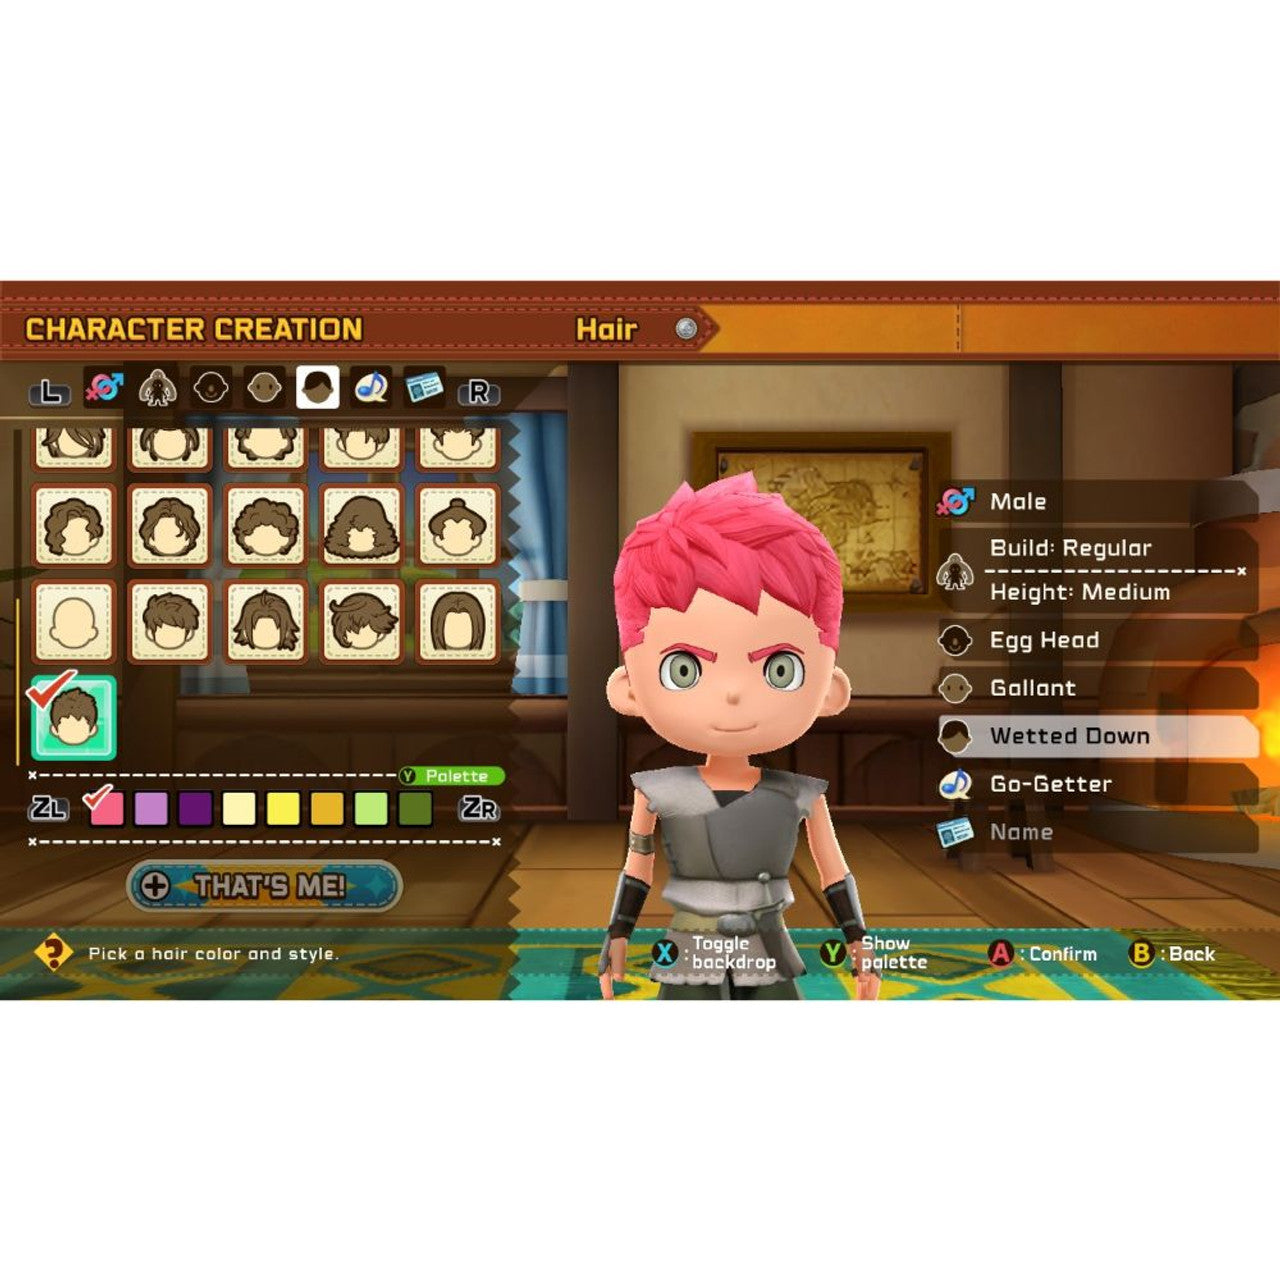 Nintendo - Snack World: The Dungeon Crawl Gold - Switch